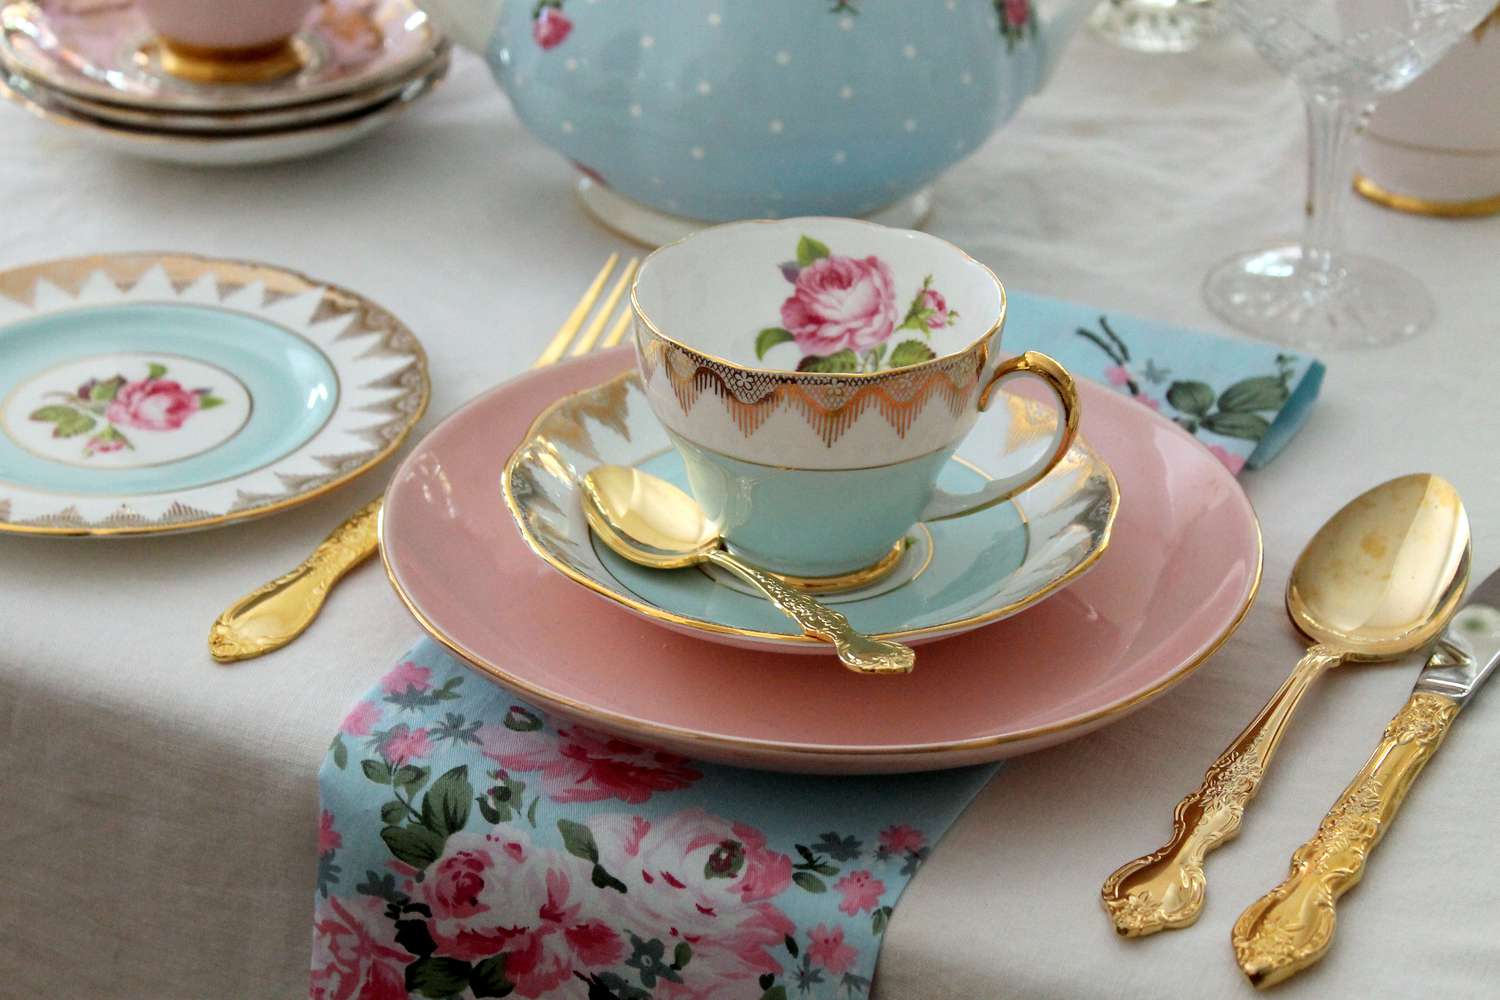 Vintage high tea party pink and blue tea cup, plates, gold cutlery flatware, pink roses, place setting - wedding bridal shower